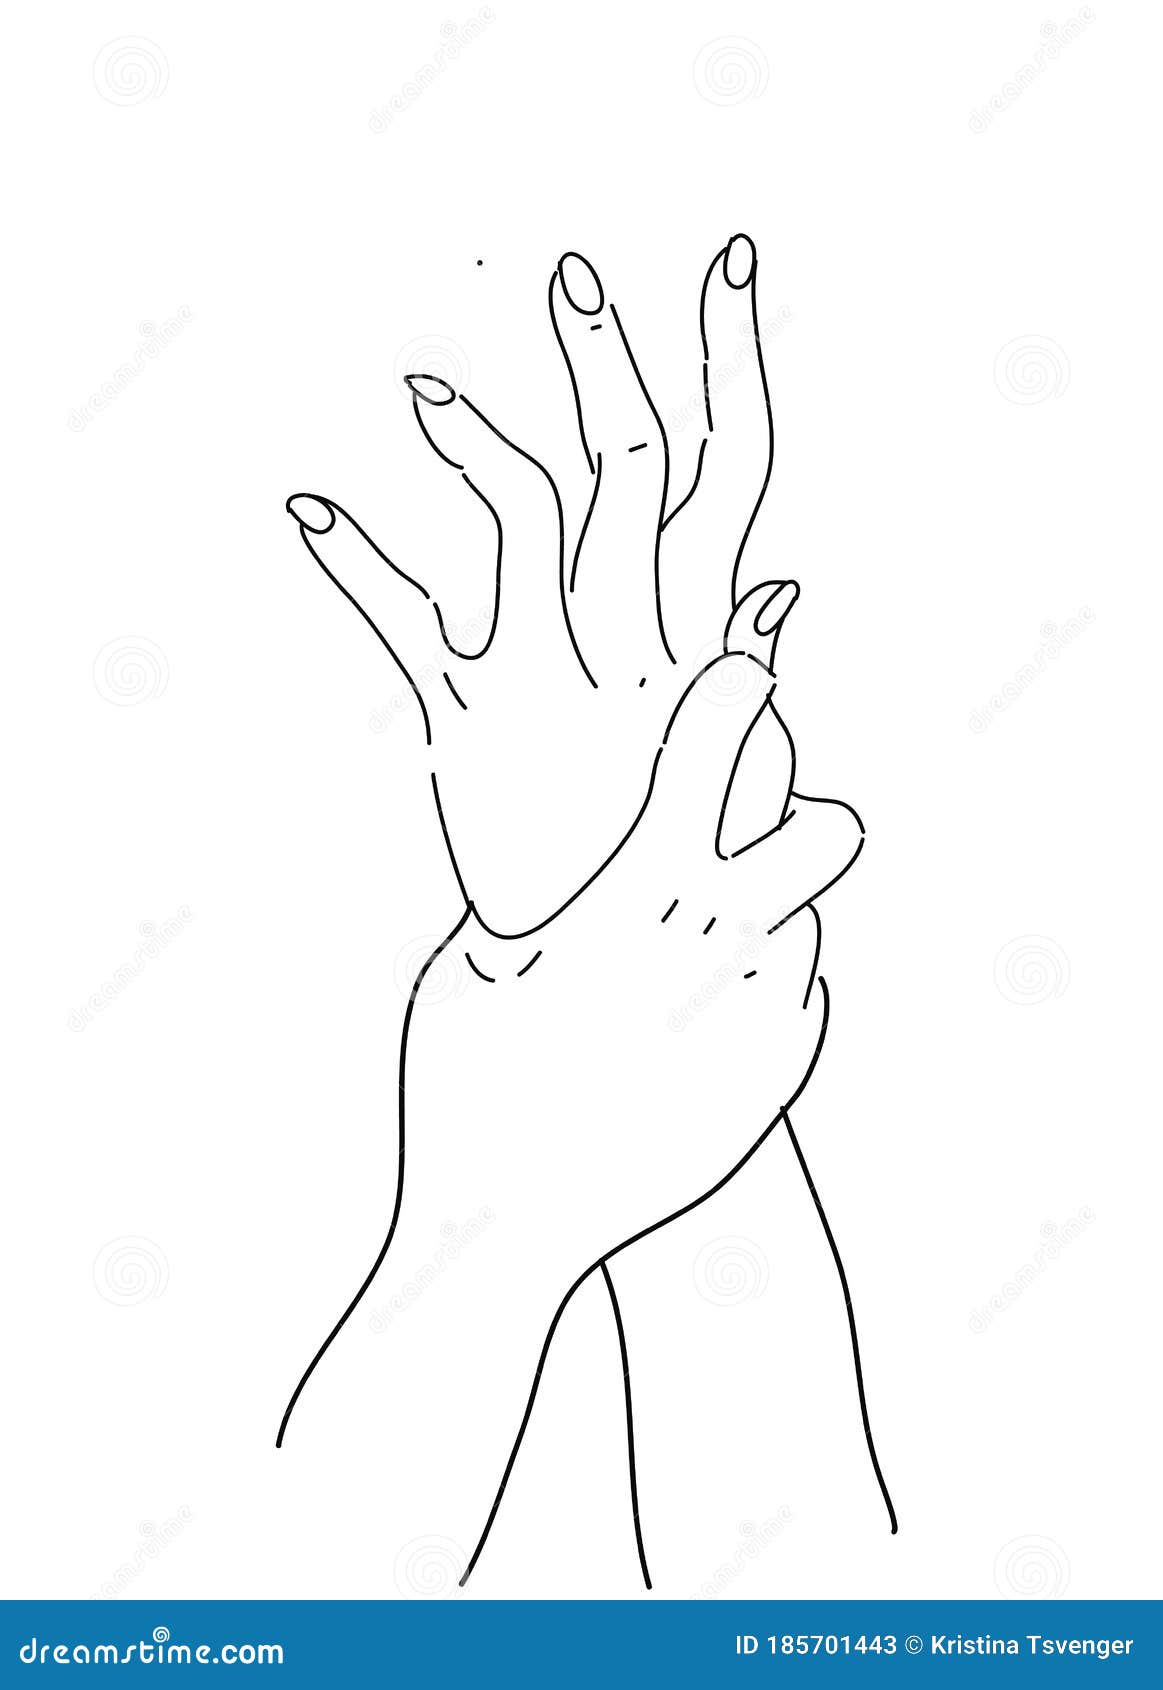 Continuous Line Drawing Holding Hands Together Stock Illustrations 341 Continuous Line Drawing Holding Hands Together Stock Illustrations Vectors Clipart Dreamstime